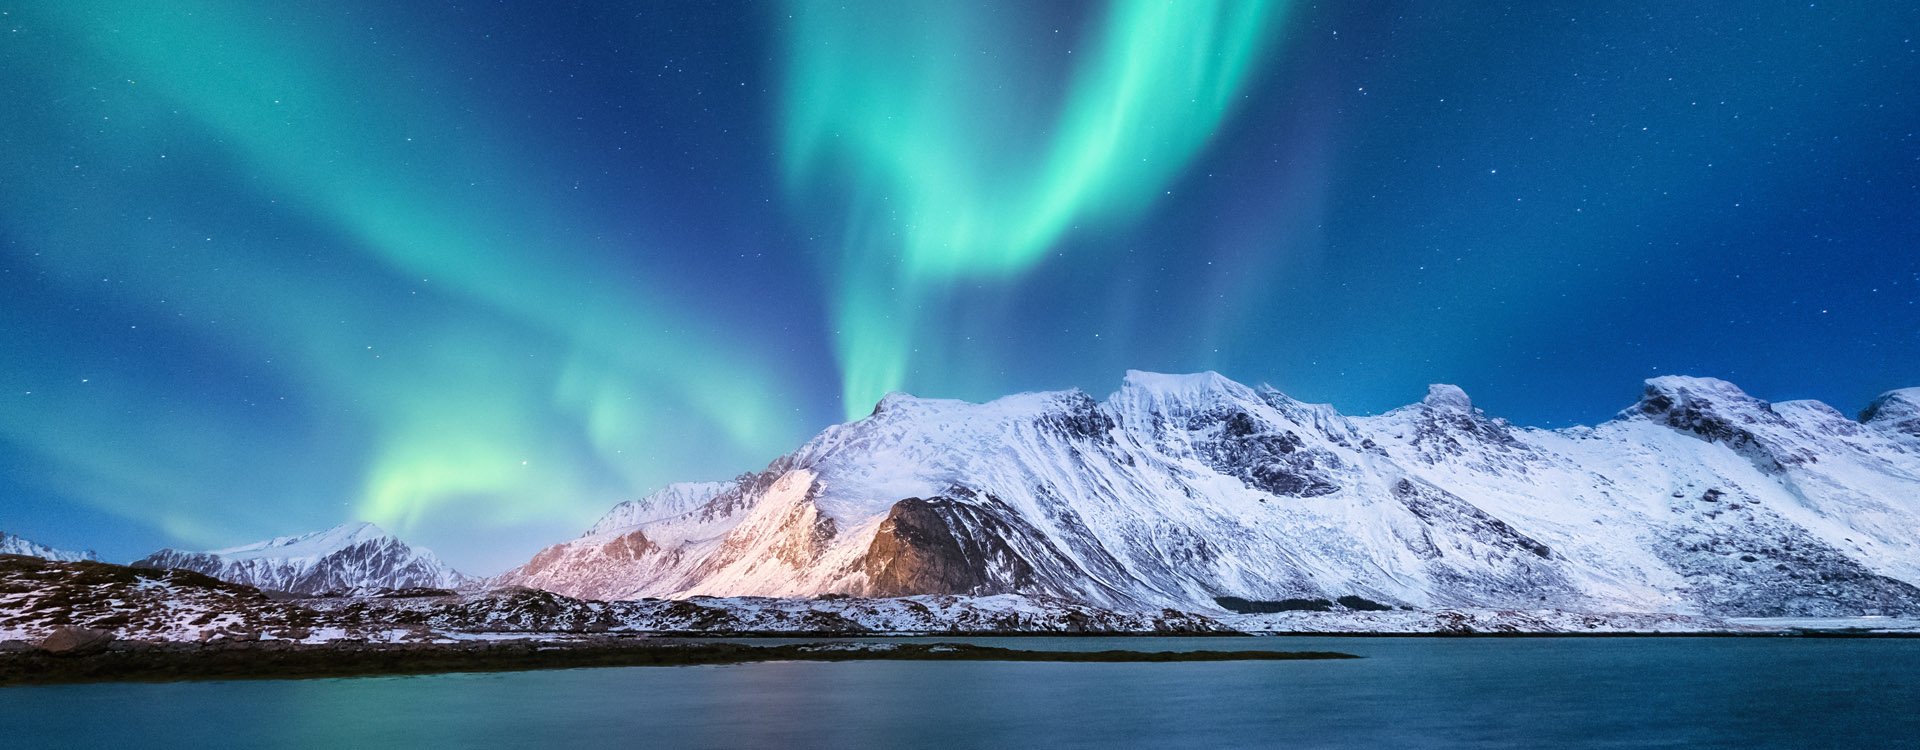 Aurora borealis, Green northern lights above mountains. Night sky with polar lights. Night winter landscape with aurora and reflection on the water surface.